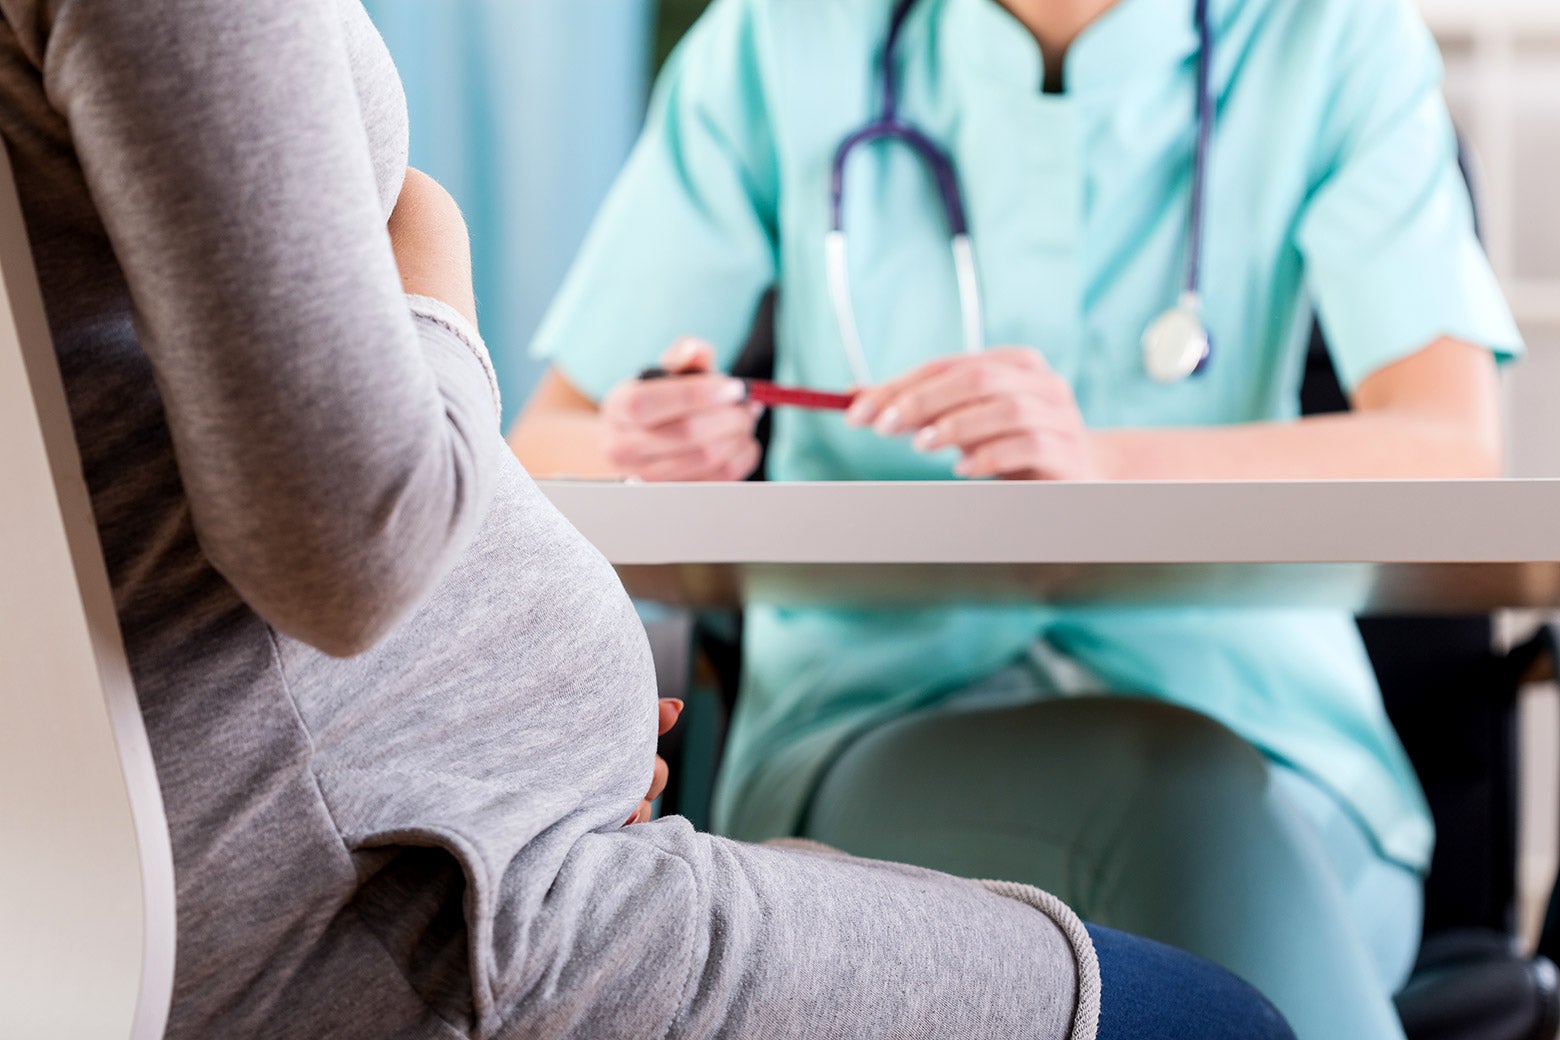 A pregnant woman holding her stomach while she speaks to a doctor.